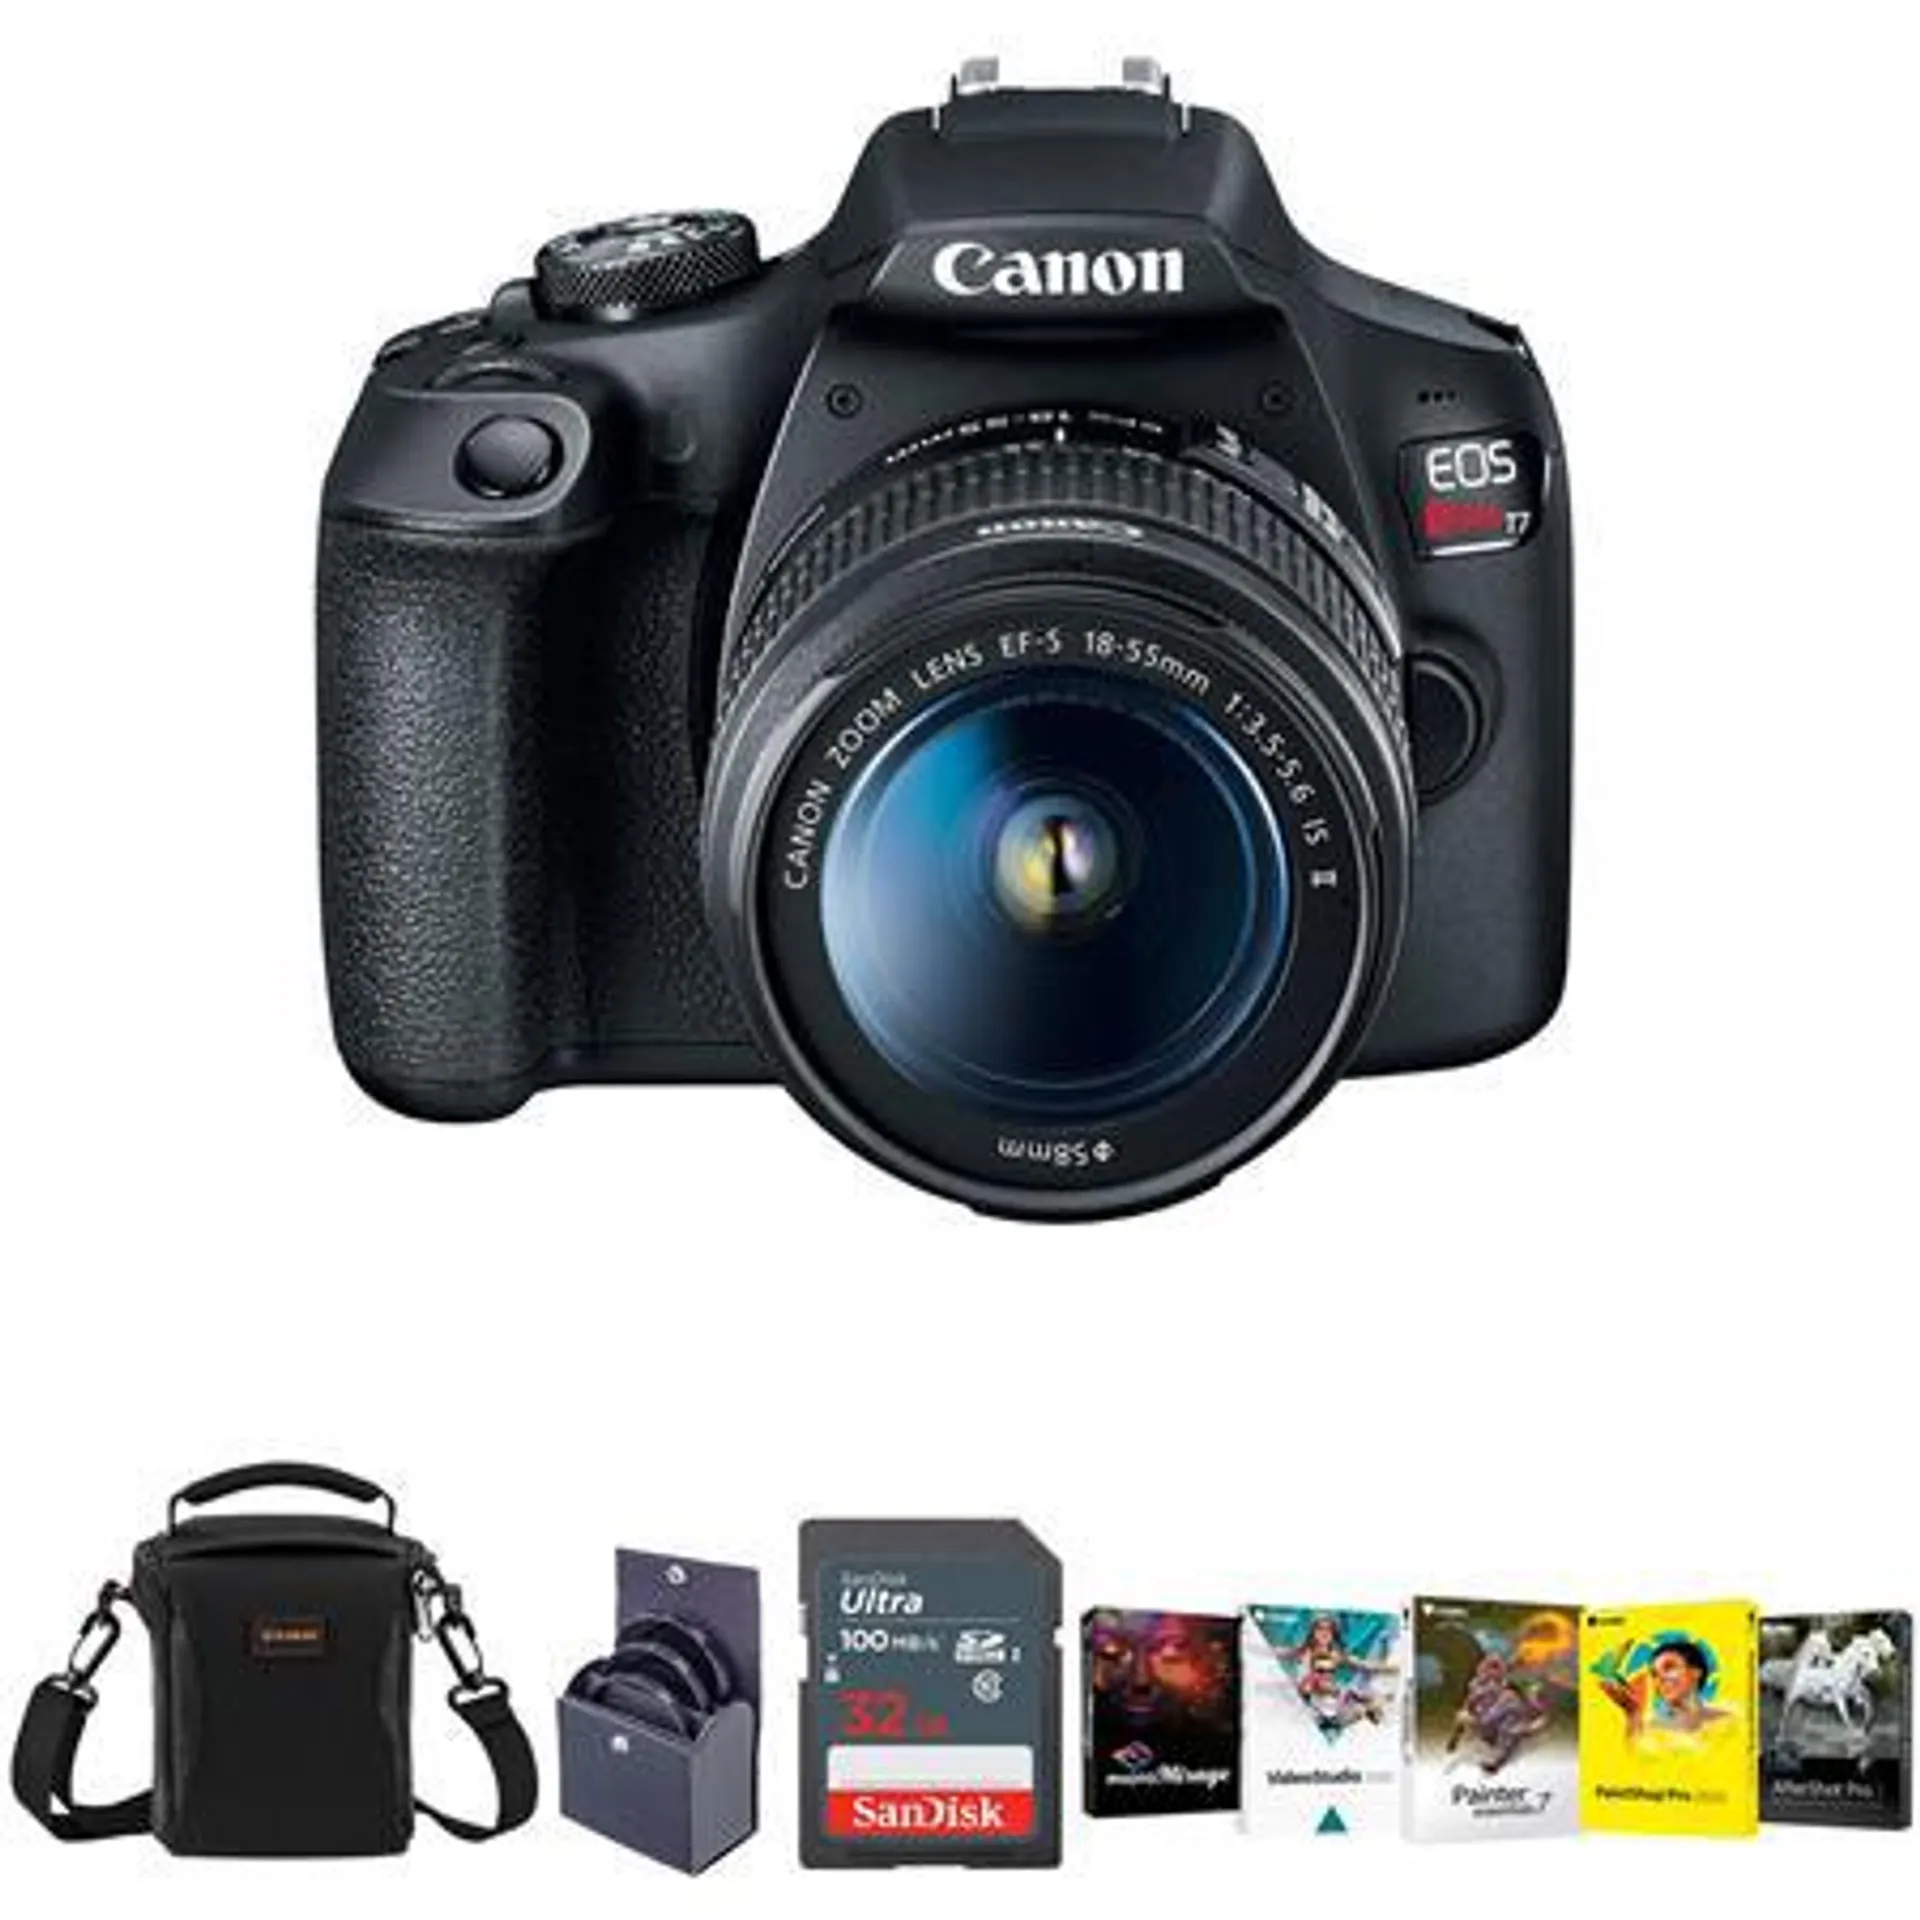 Canon EOS Rebel T7 DSLR Camera with EF-S 18-55mm f/3.5-5.6 II Lens W/Acc Bundle